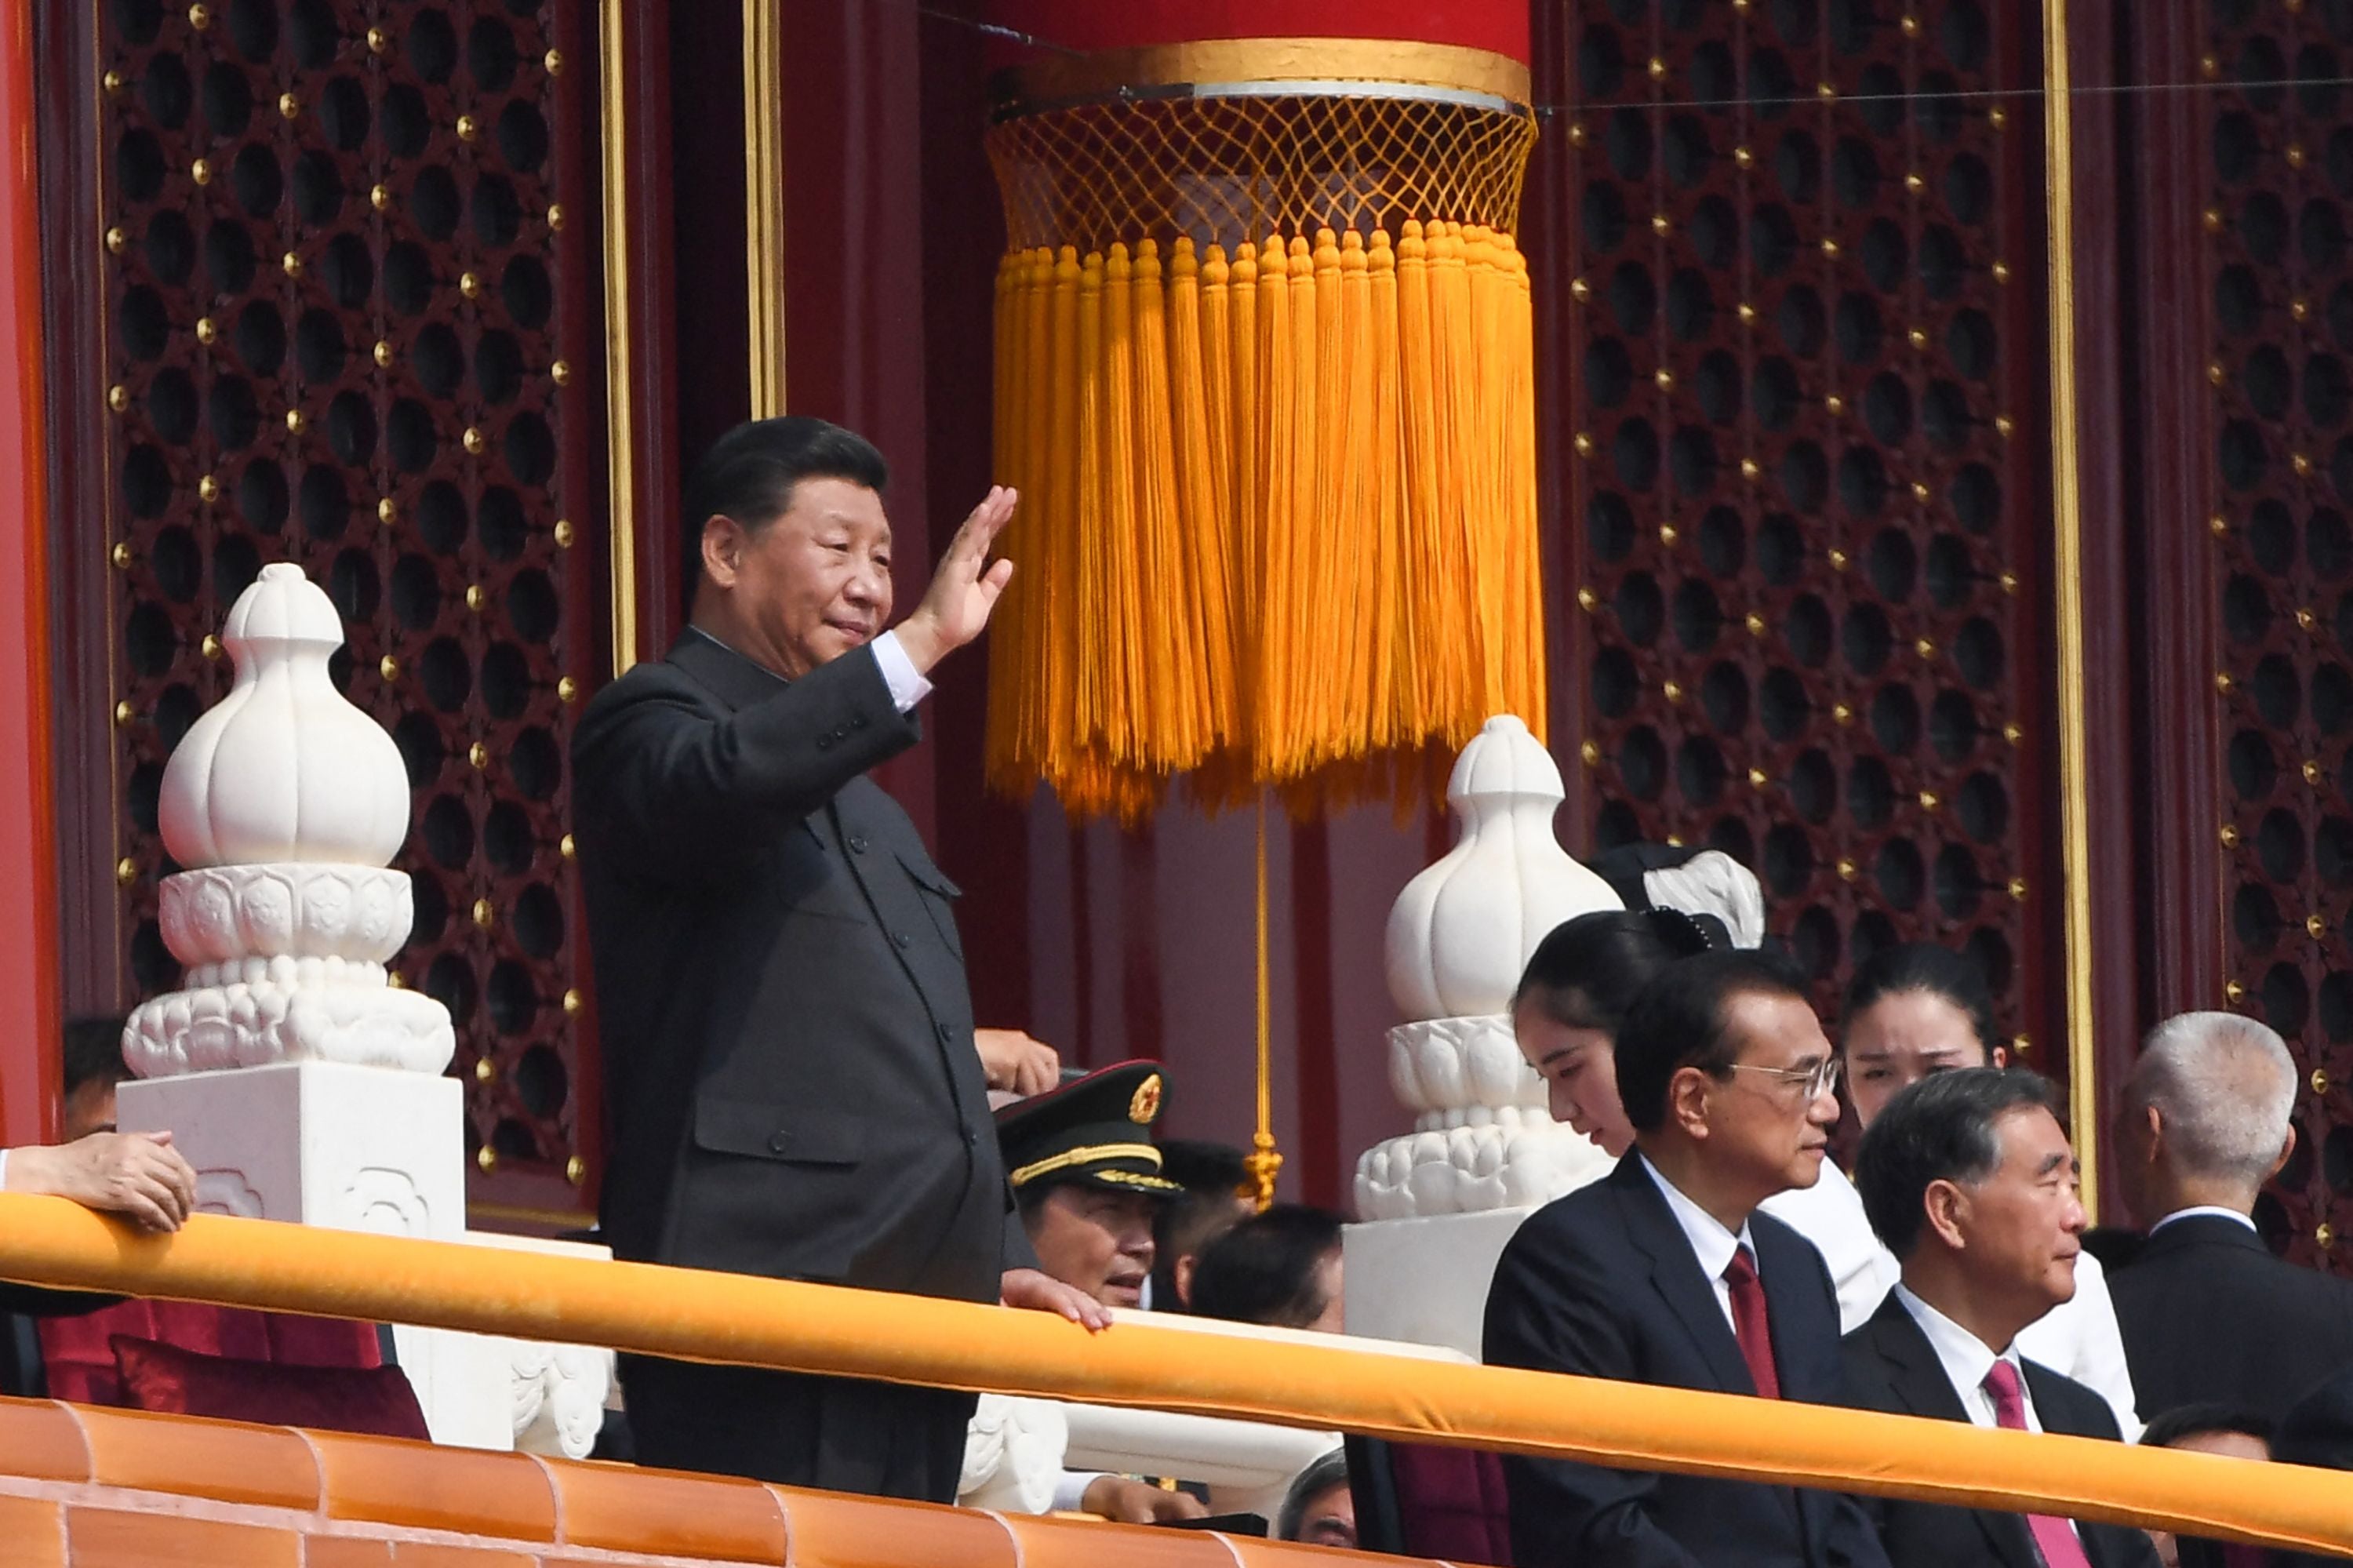 President Xi Jinping is turning China’s politics into a one-man show